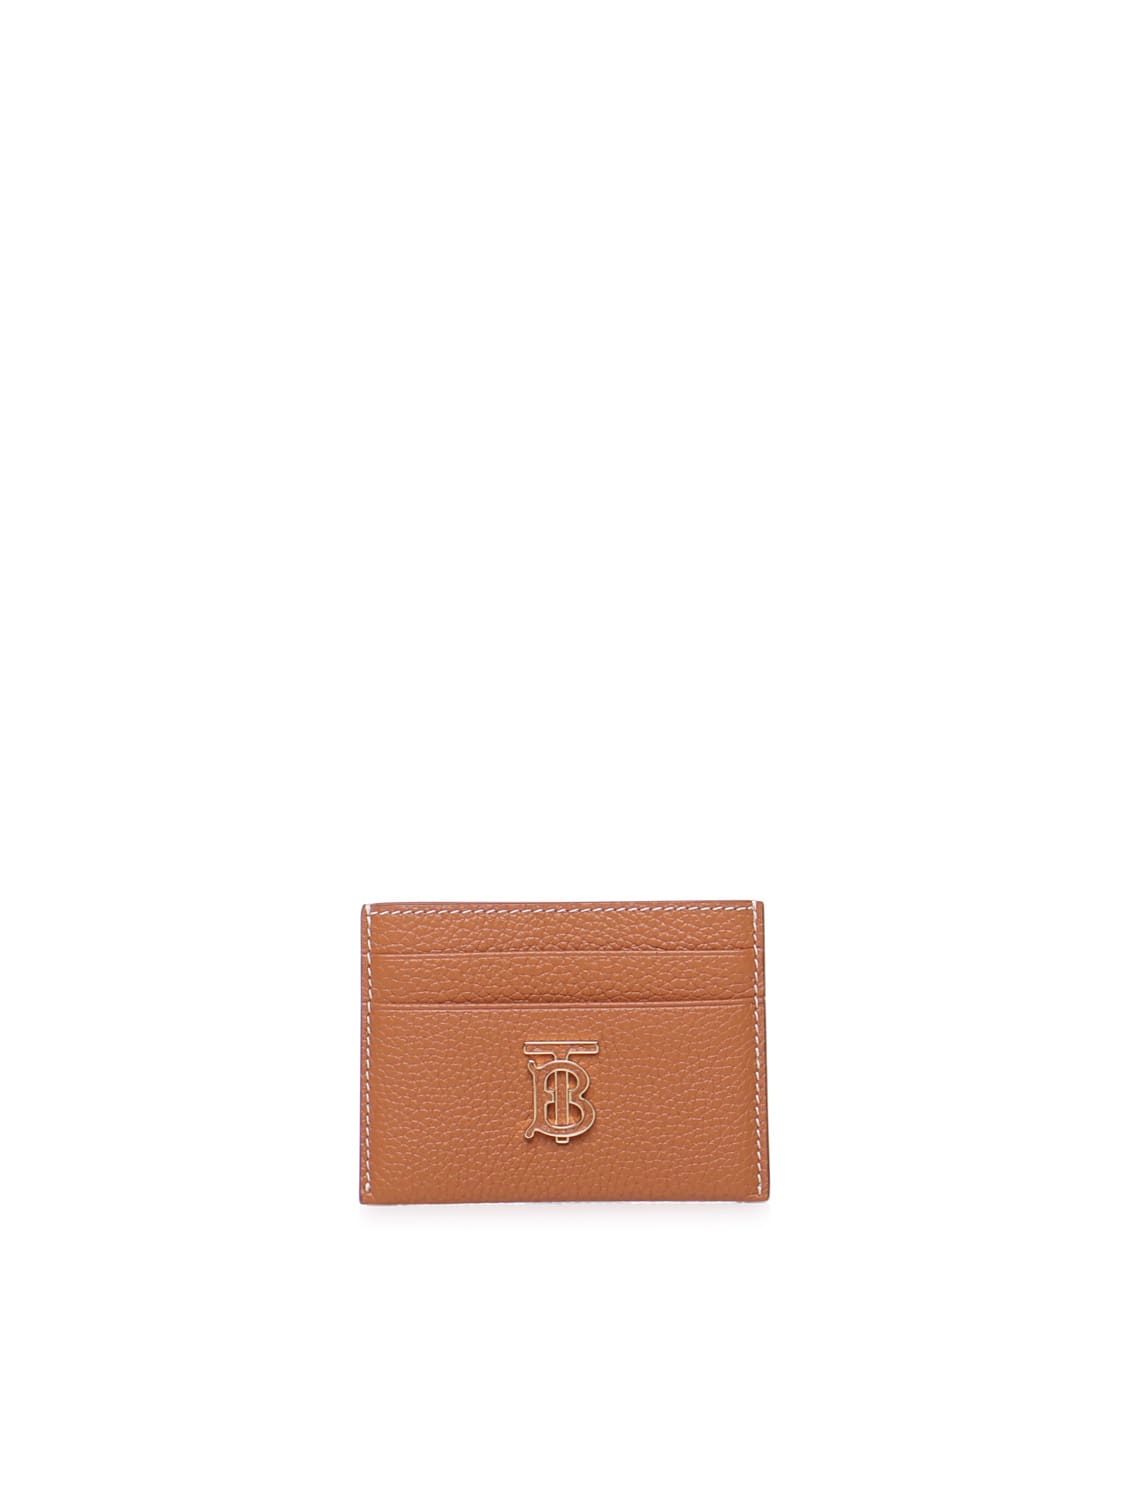 BURBERRY TB CREDIT CARD HOLDER IN GRAINED LEATHER